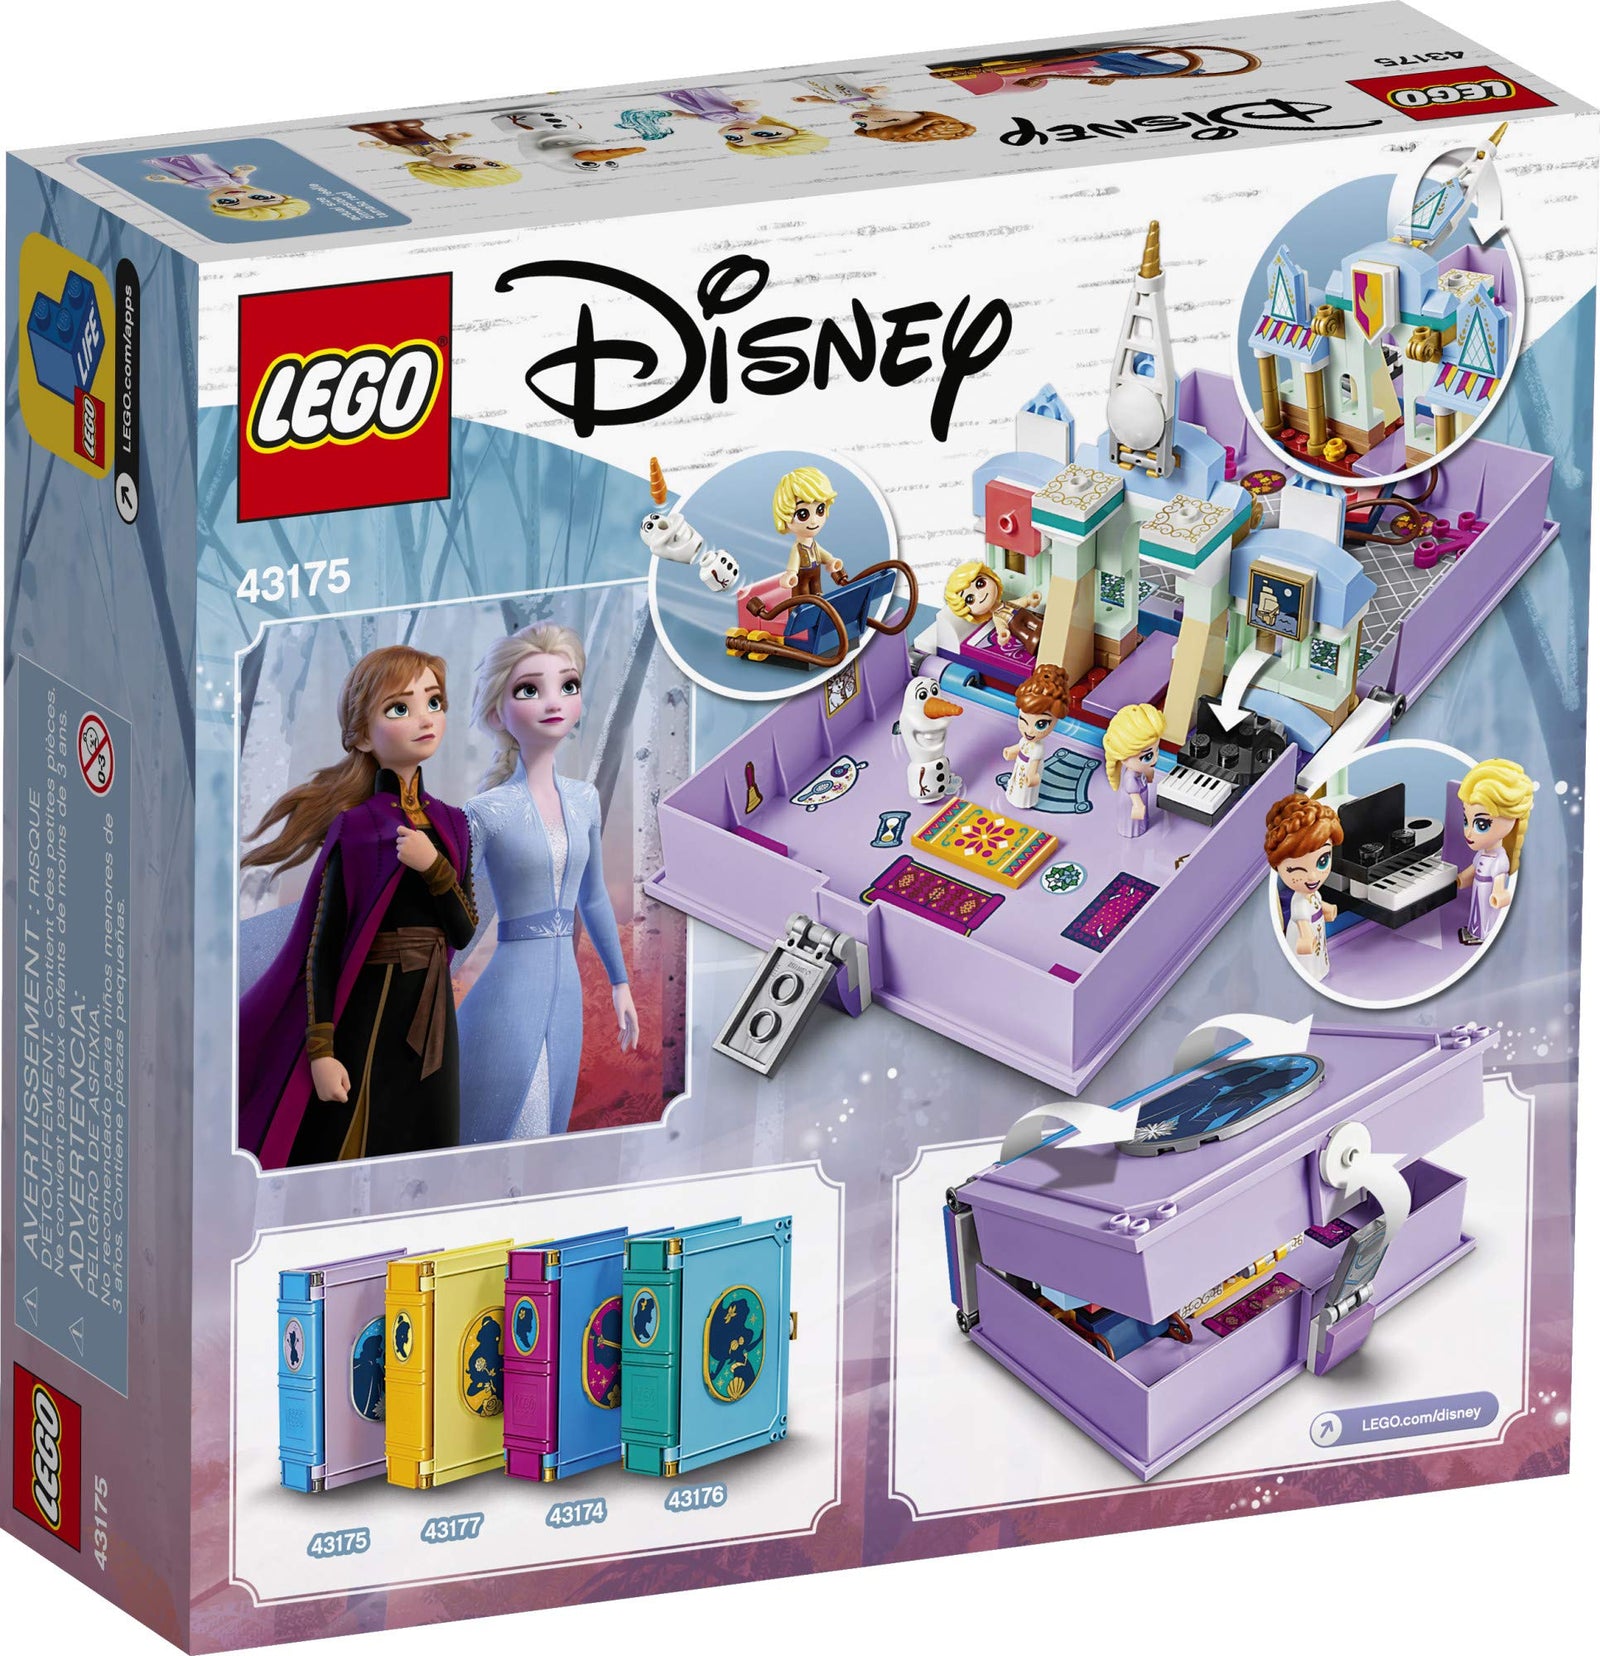 LEGO Disney Anna and Elsa’s Storybook Adventures 43175 Creative Building Kit for Fans of Disney’s Frozen 2 (133 Pieces)